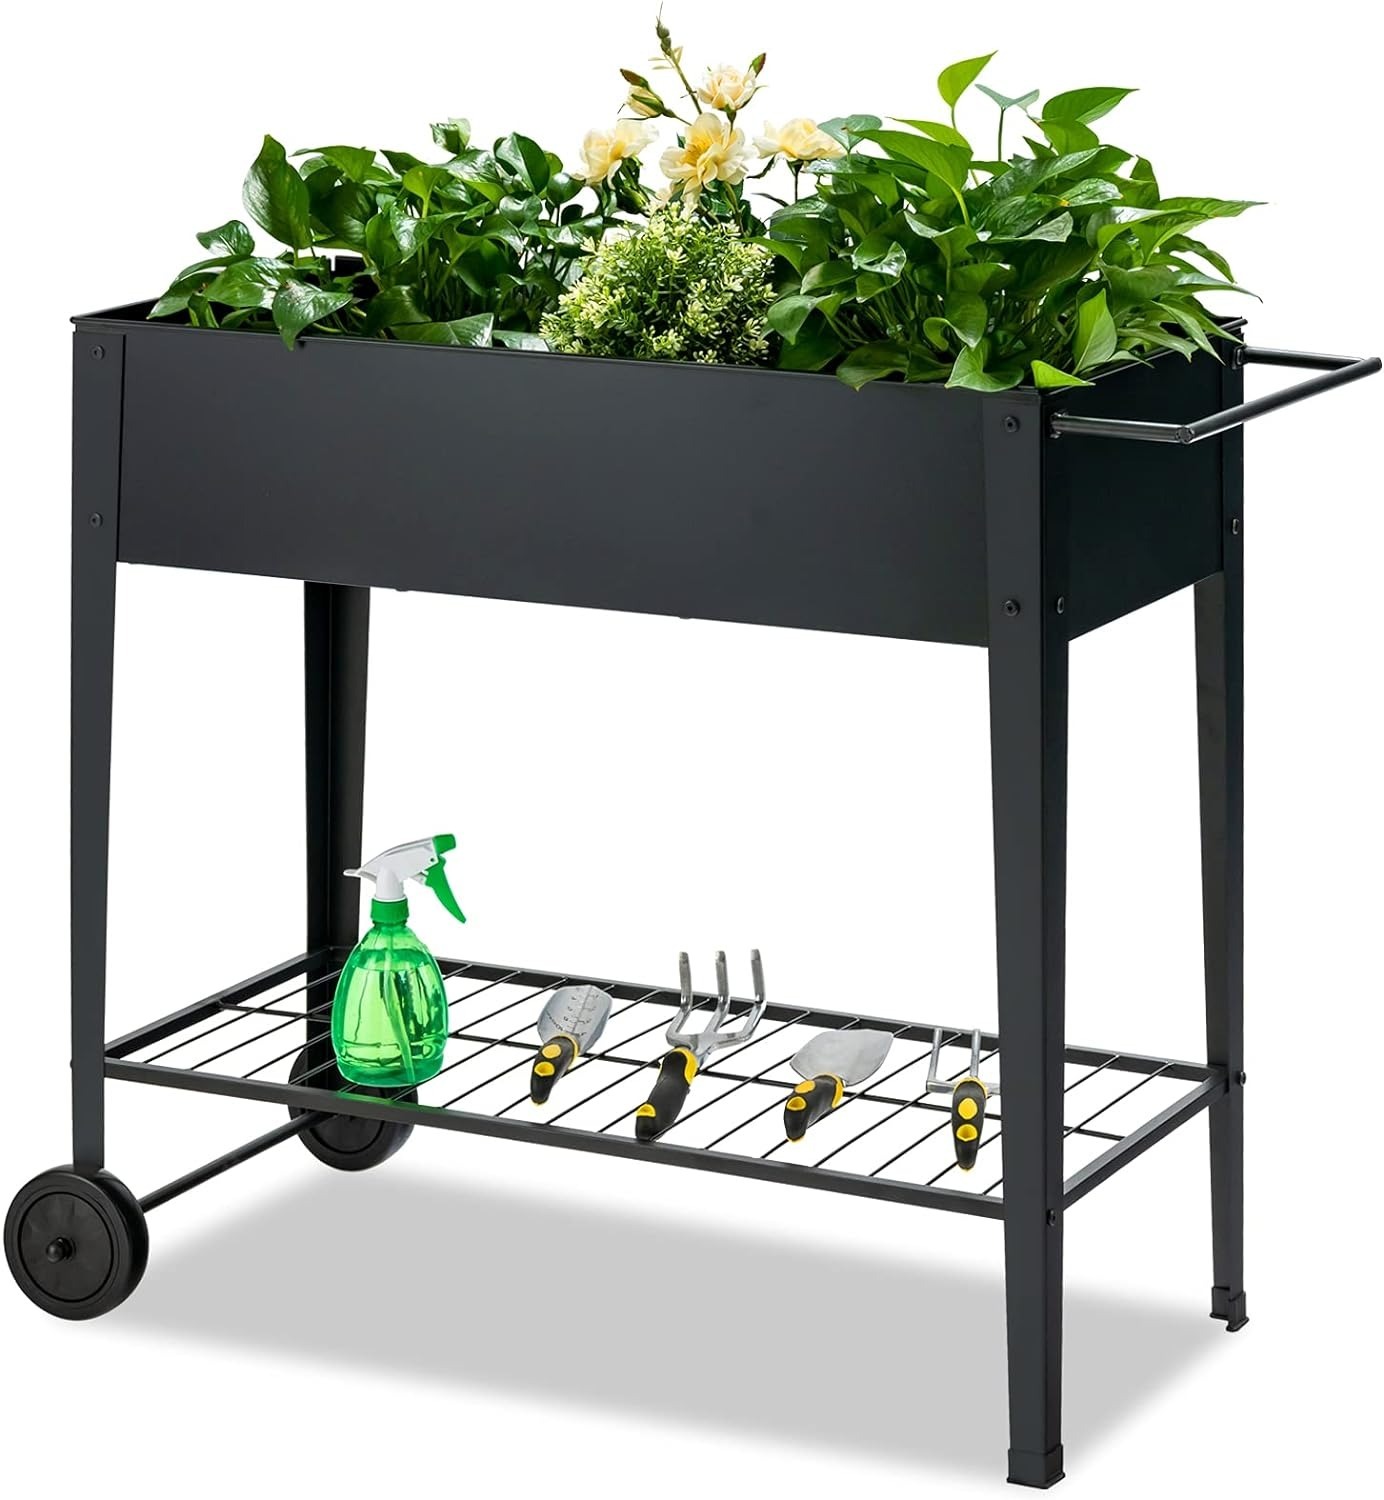 Outdoor Elevated Planter Box Raised Garden Bed with Wheels $53.95 + Free Shipping